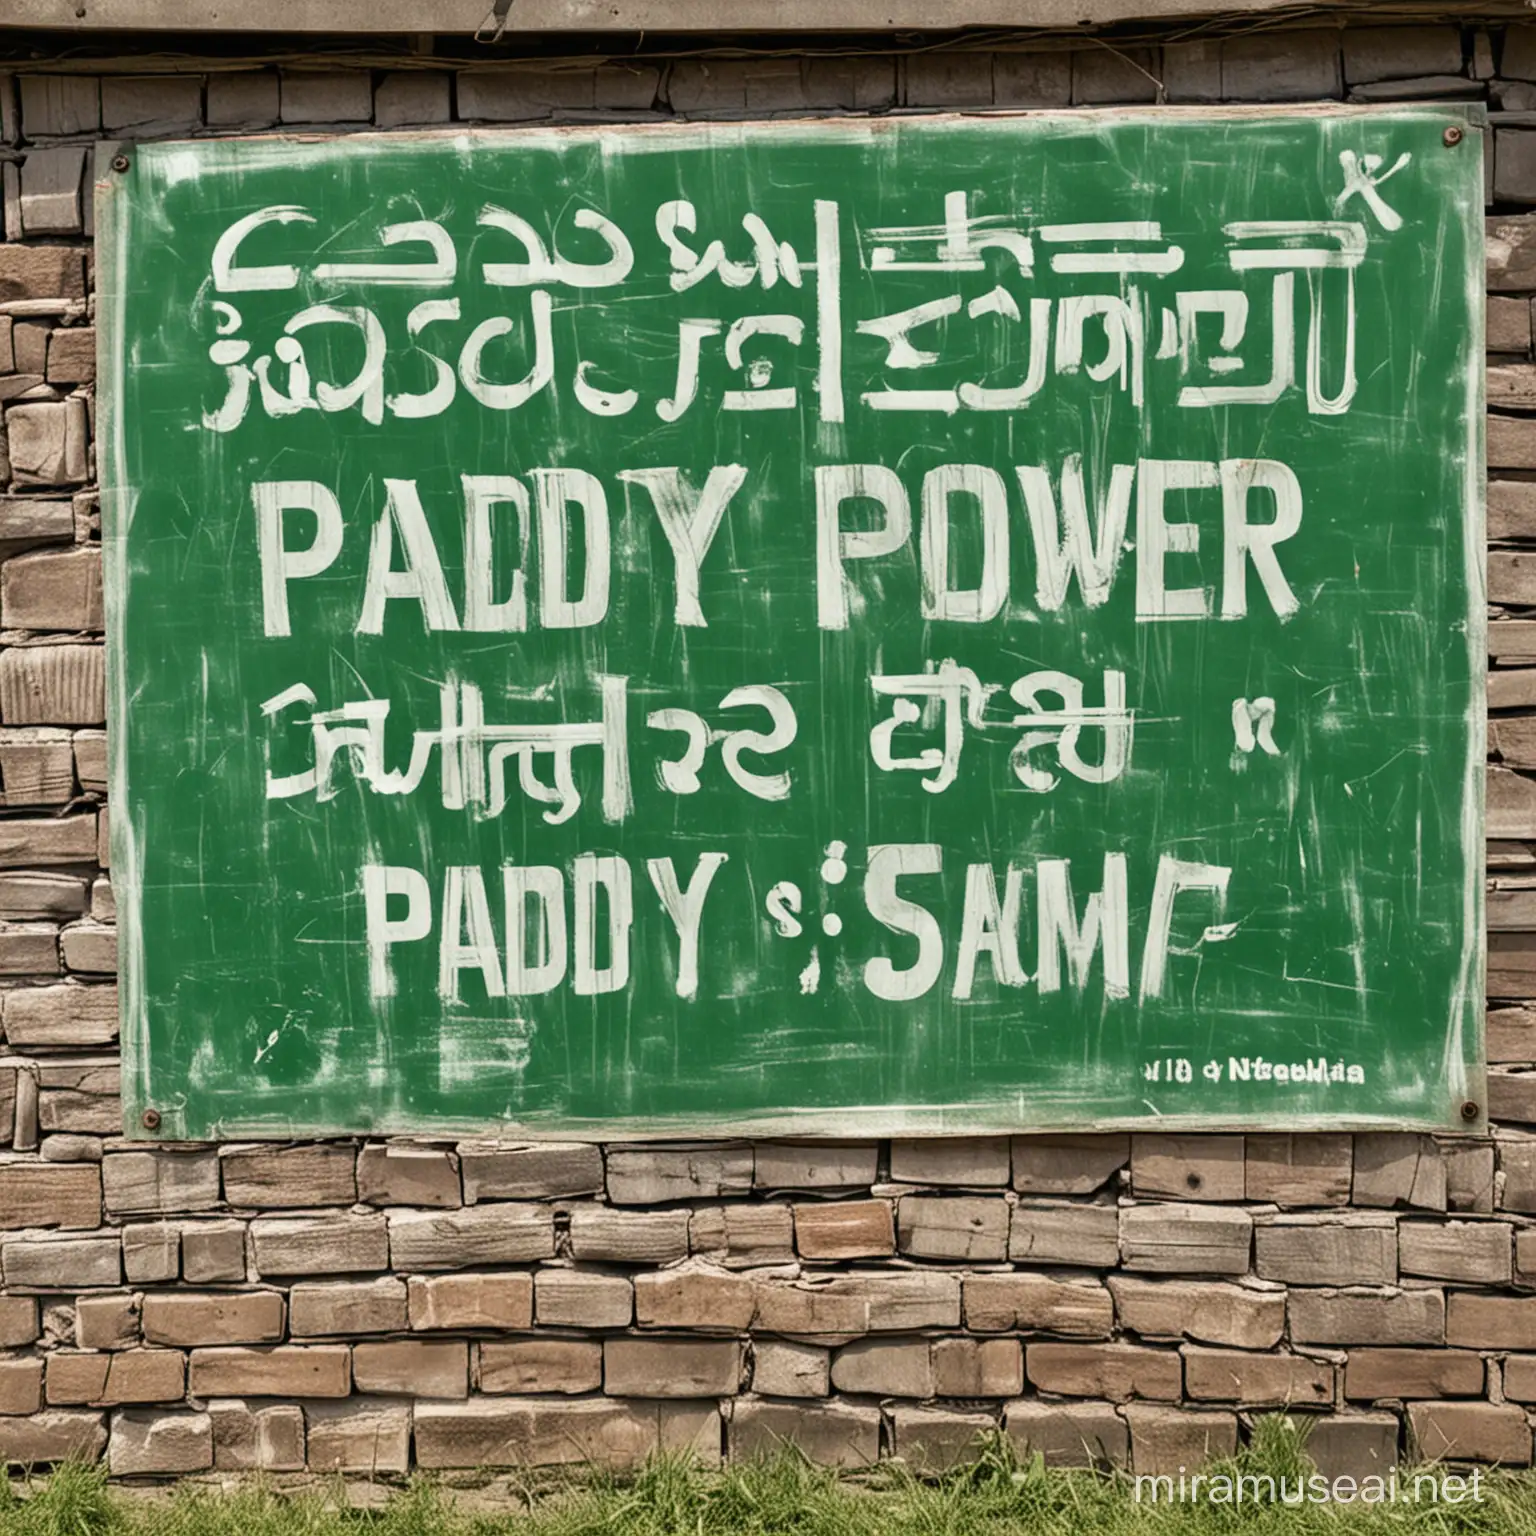 Shireesha, written on a sign. The sign has "paddy power scam" written on it in green writing.